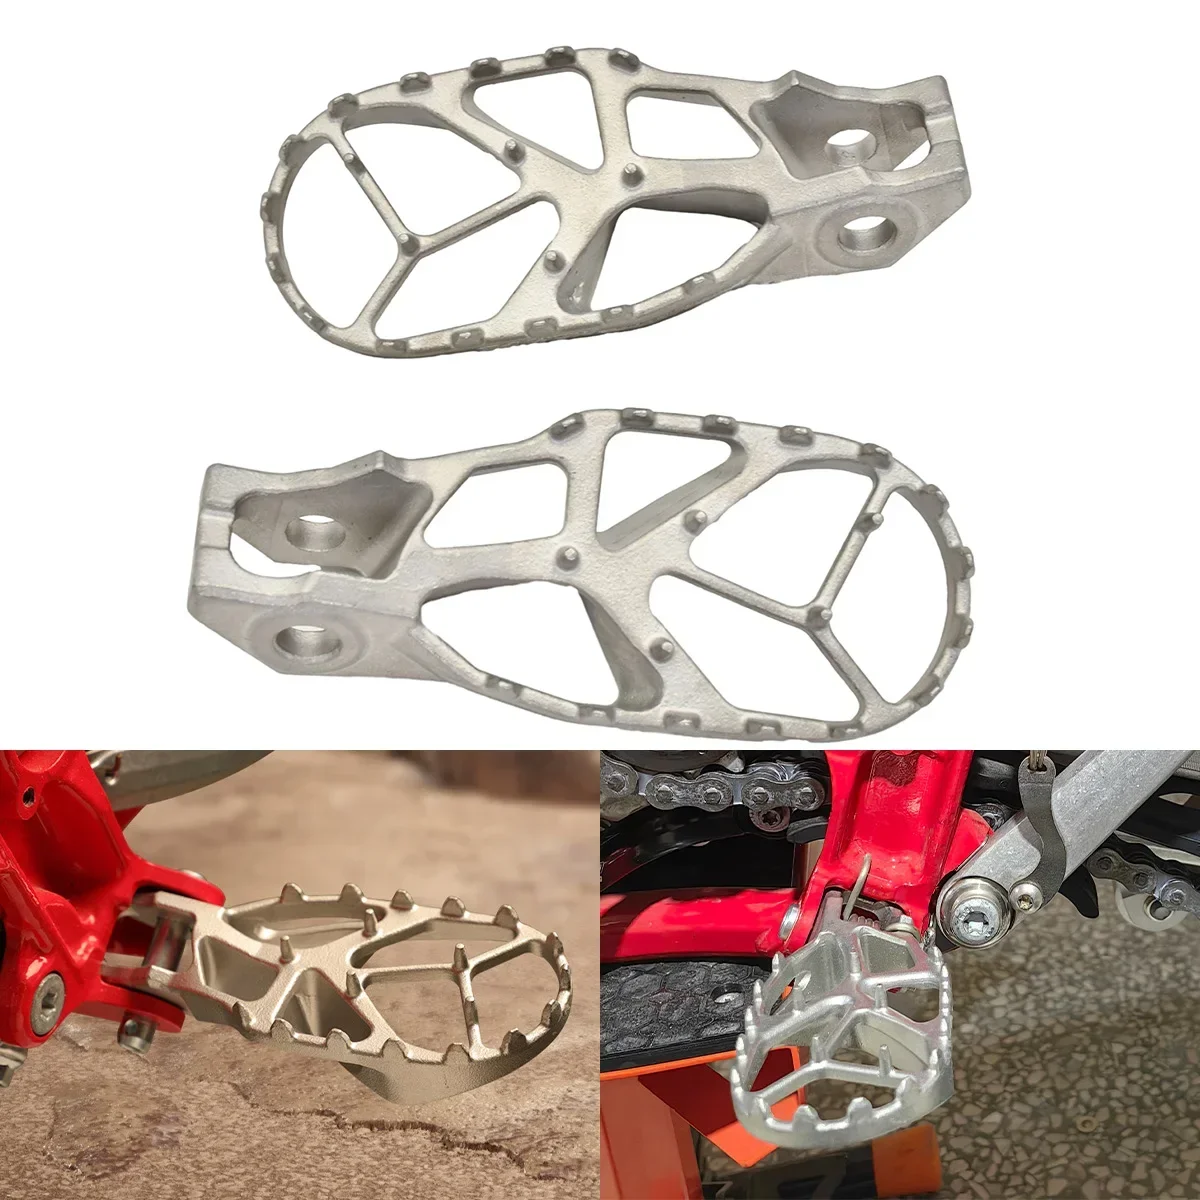 

Motorcycle Foot Pegs FootRest Footpegs Rests Pedals For KTM EXC EXCF 250 300 XC XCF SX SXF 85 125 150 200 350 450 530 2017-2023